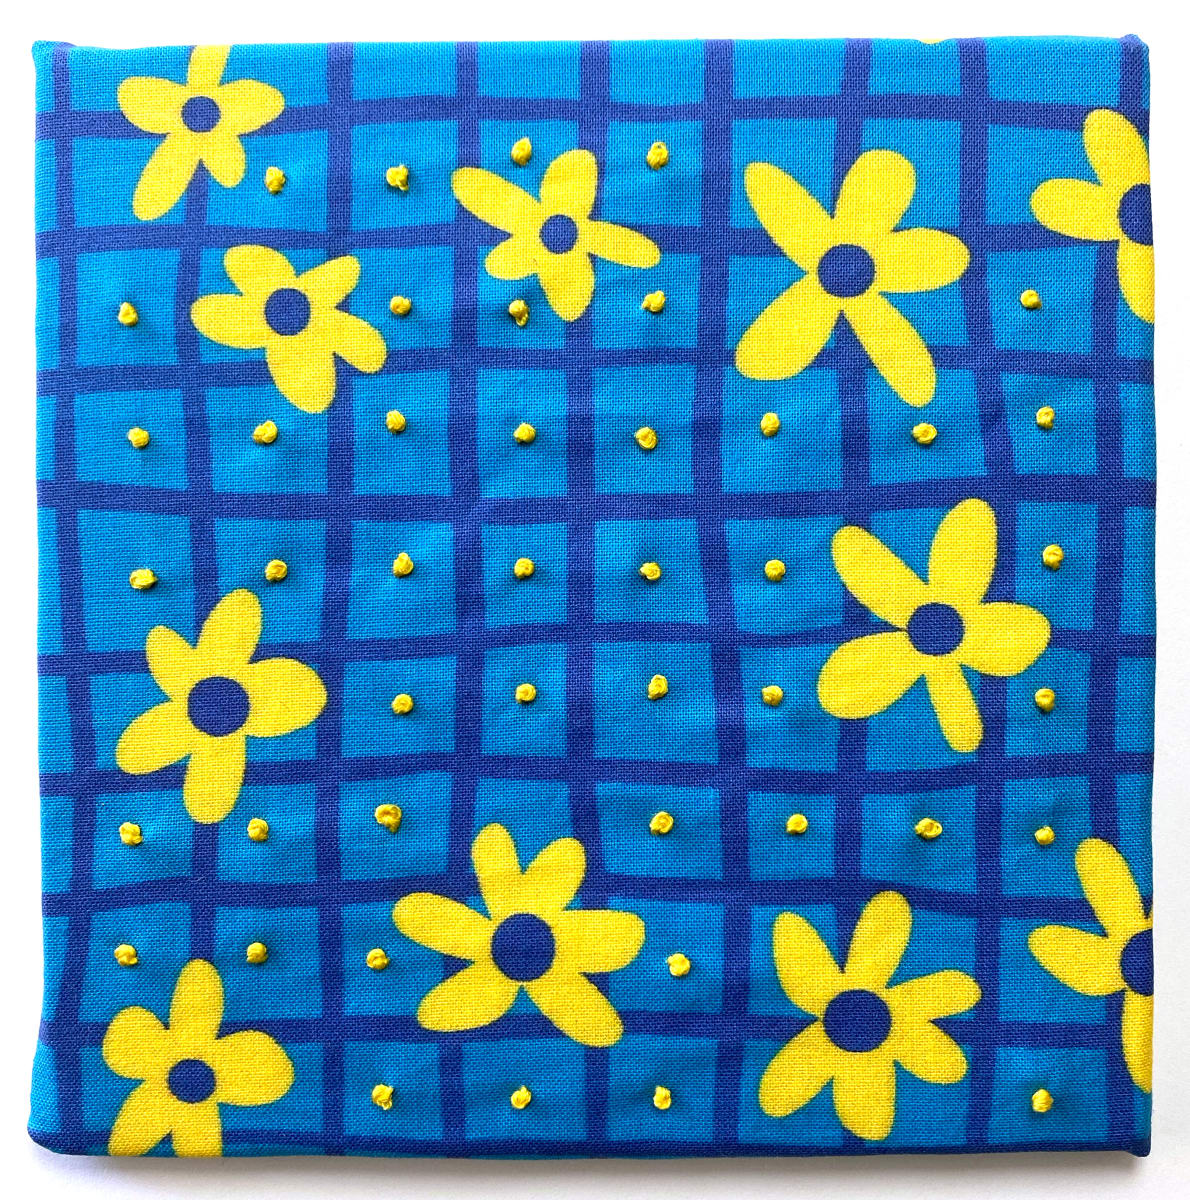 Flower Power - French Knots by Anne M Bray  Image: Embroidery on a print that I designed.